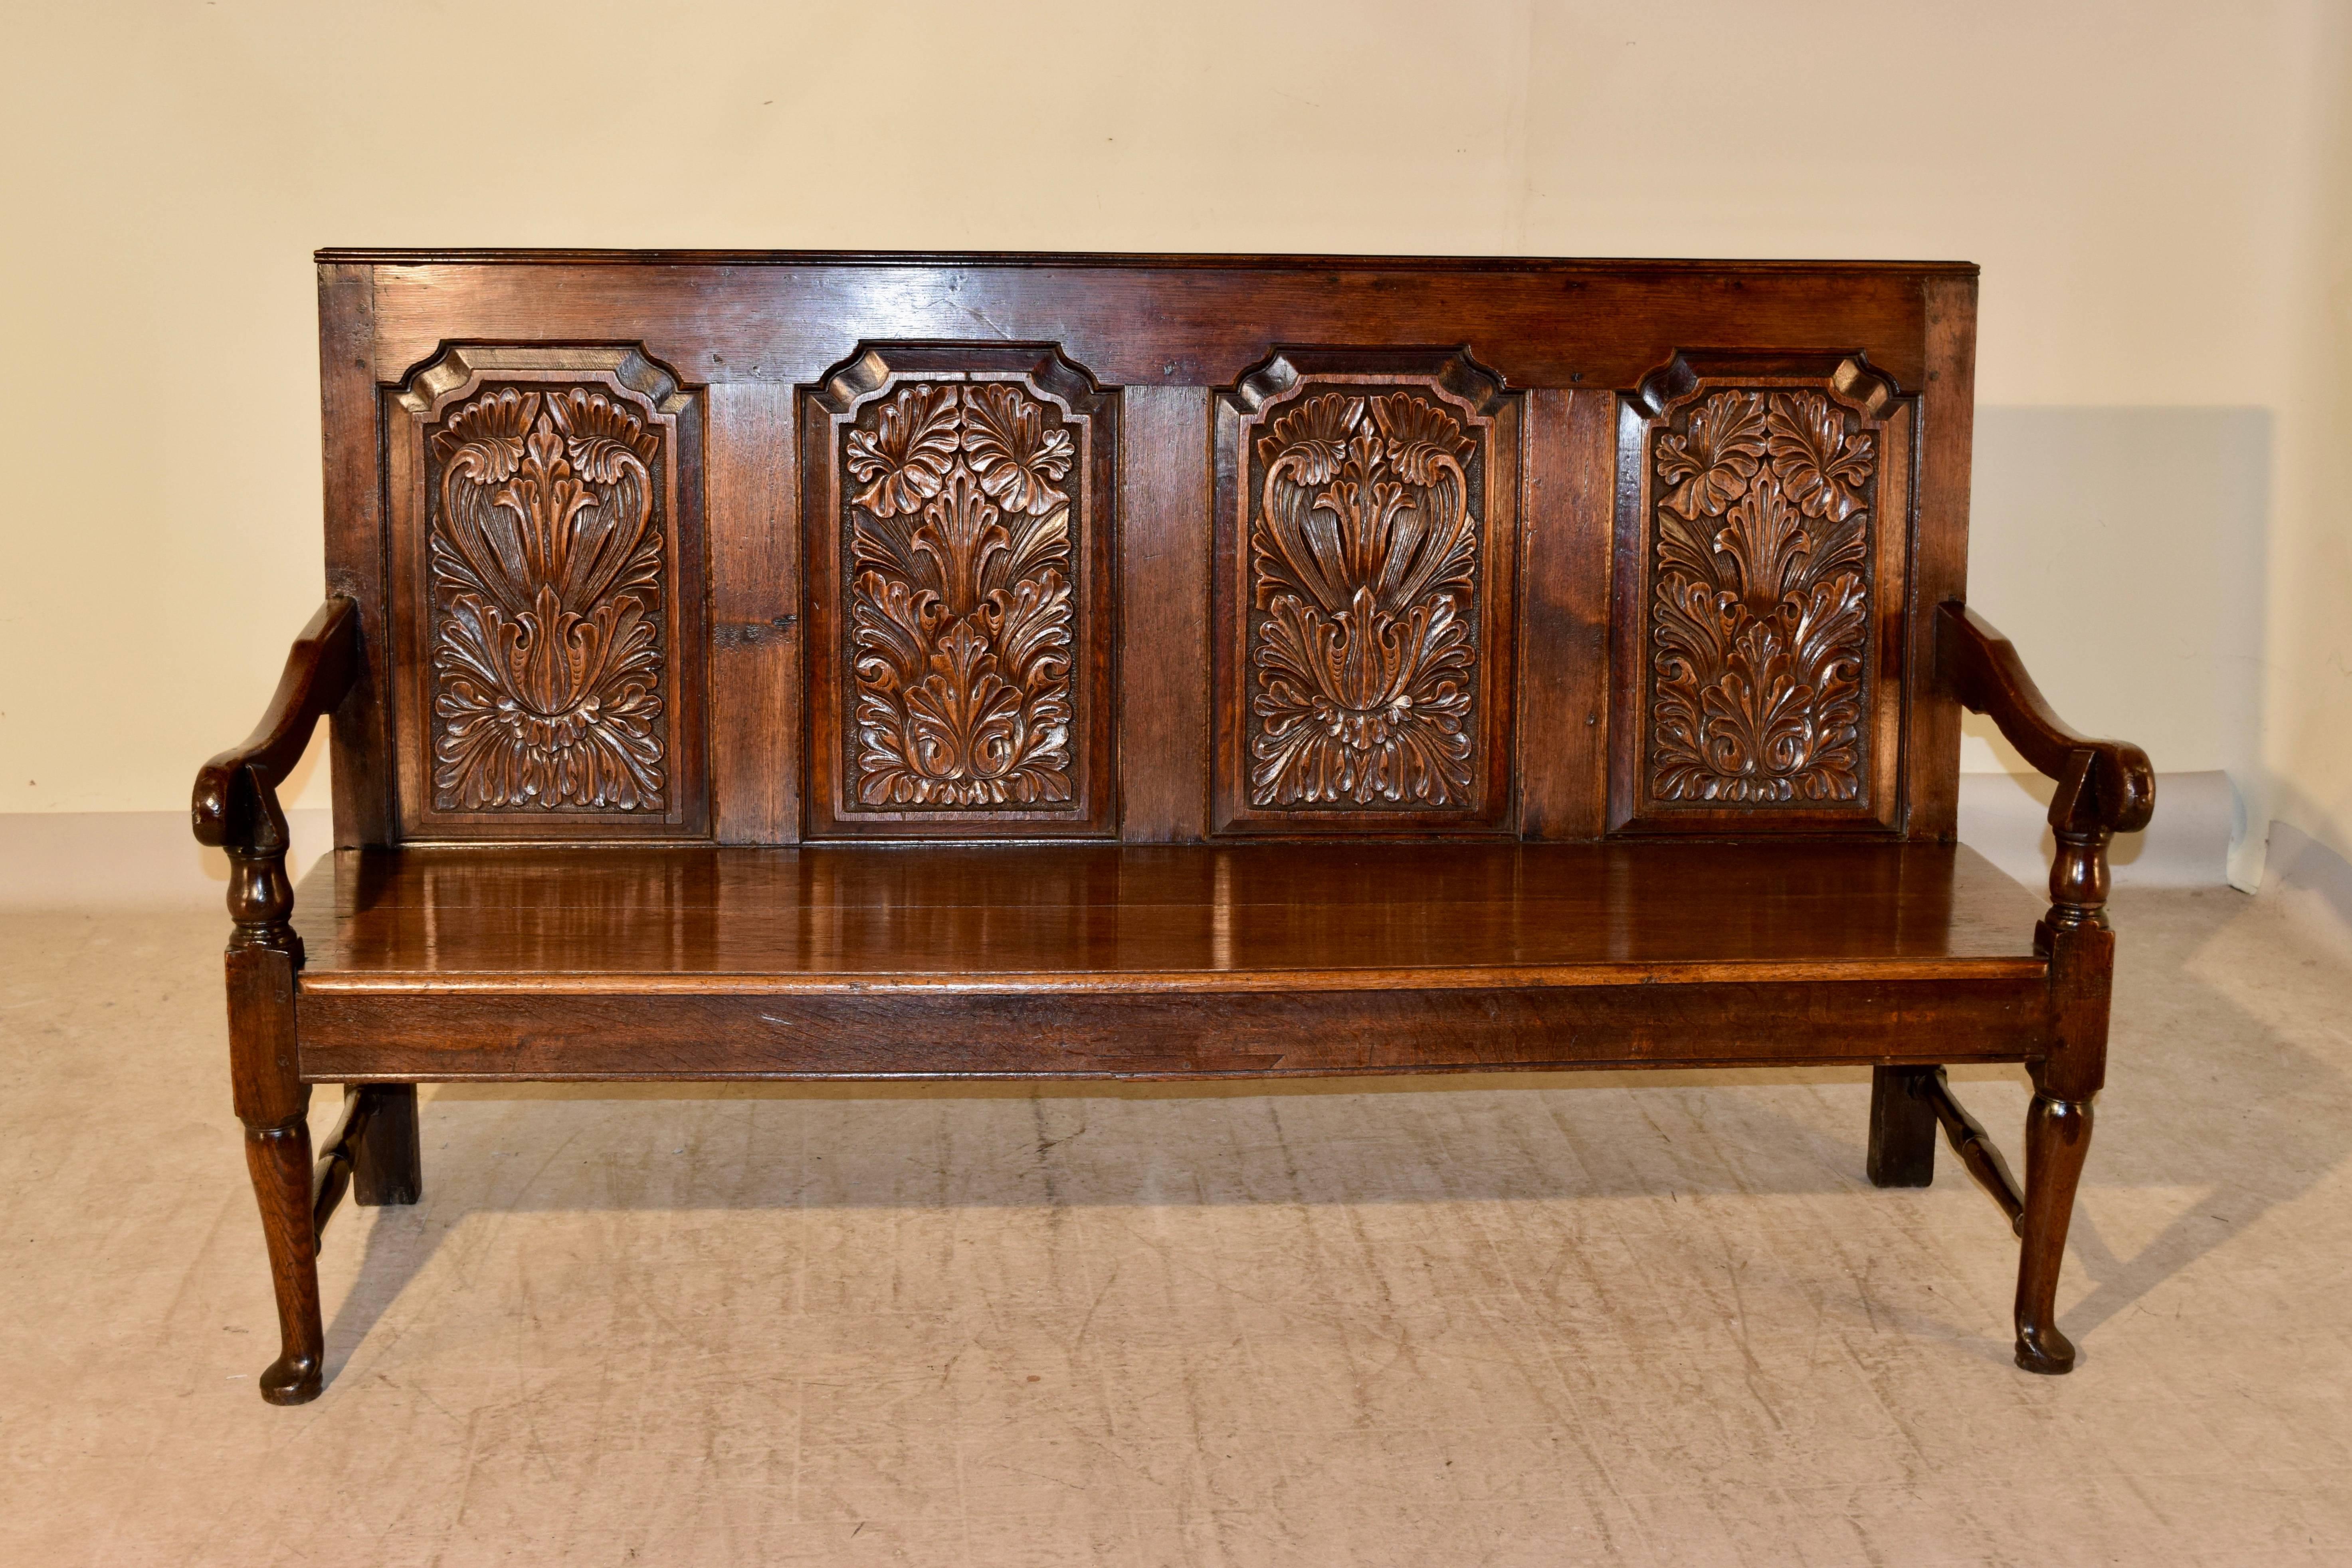 Hand-Carved 18th Century English Carved Oak Bench